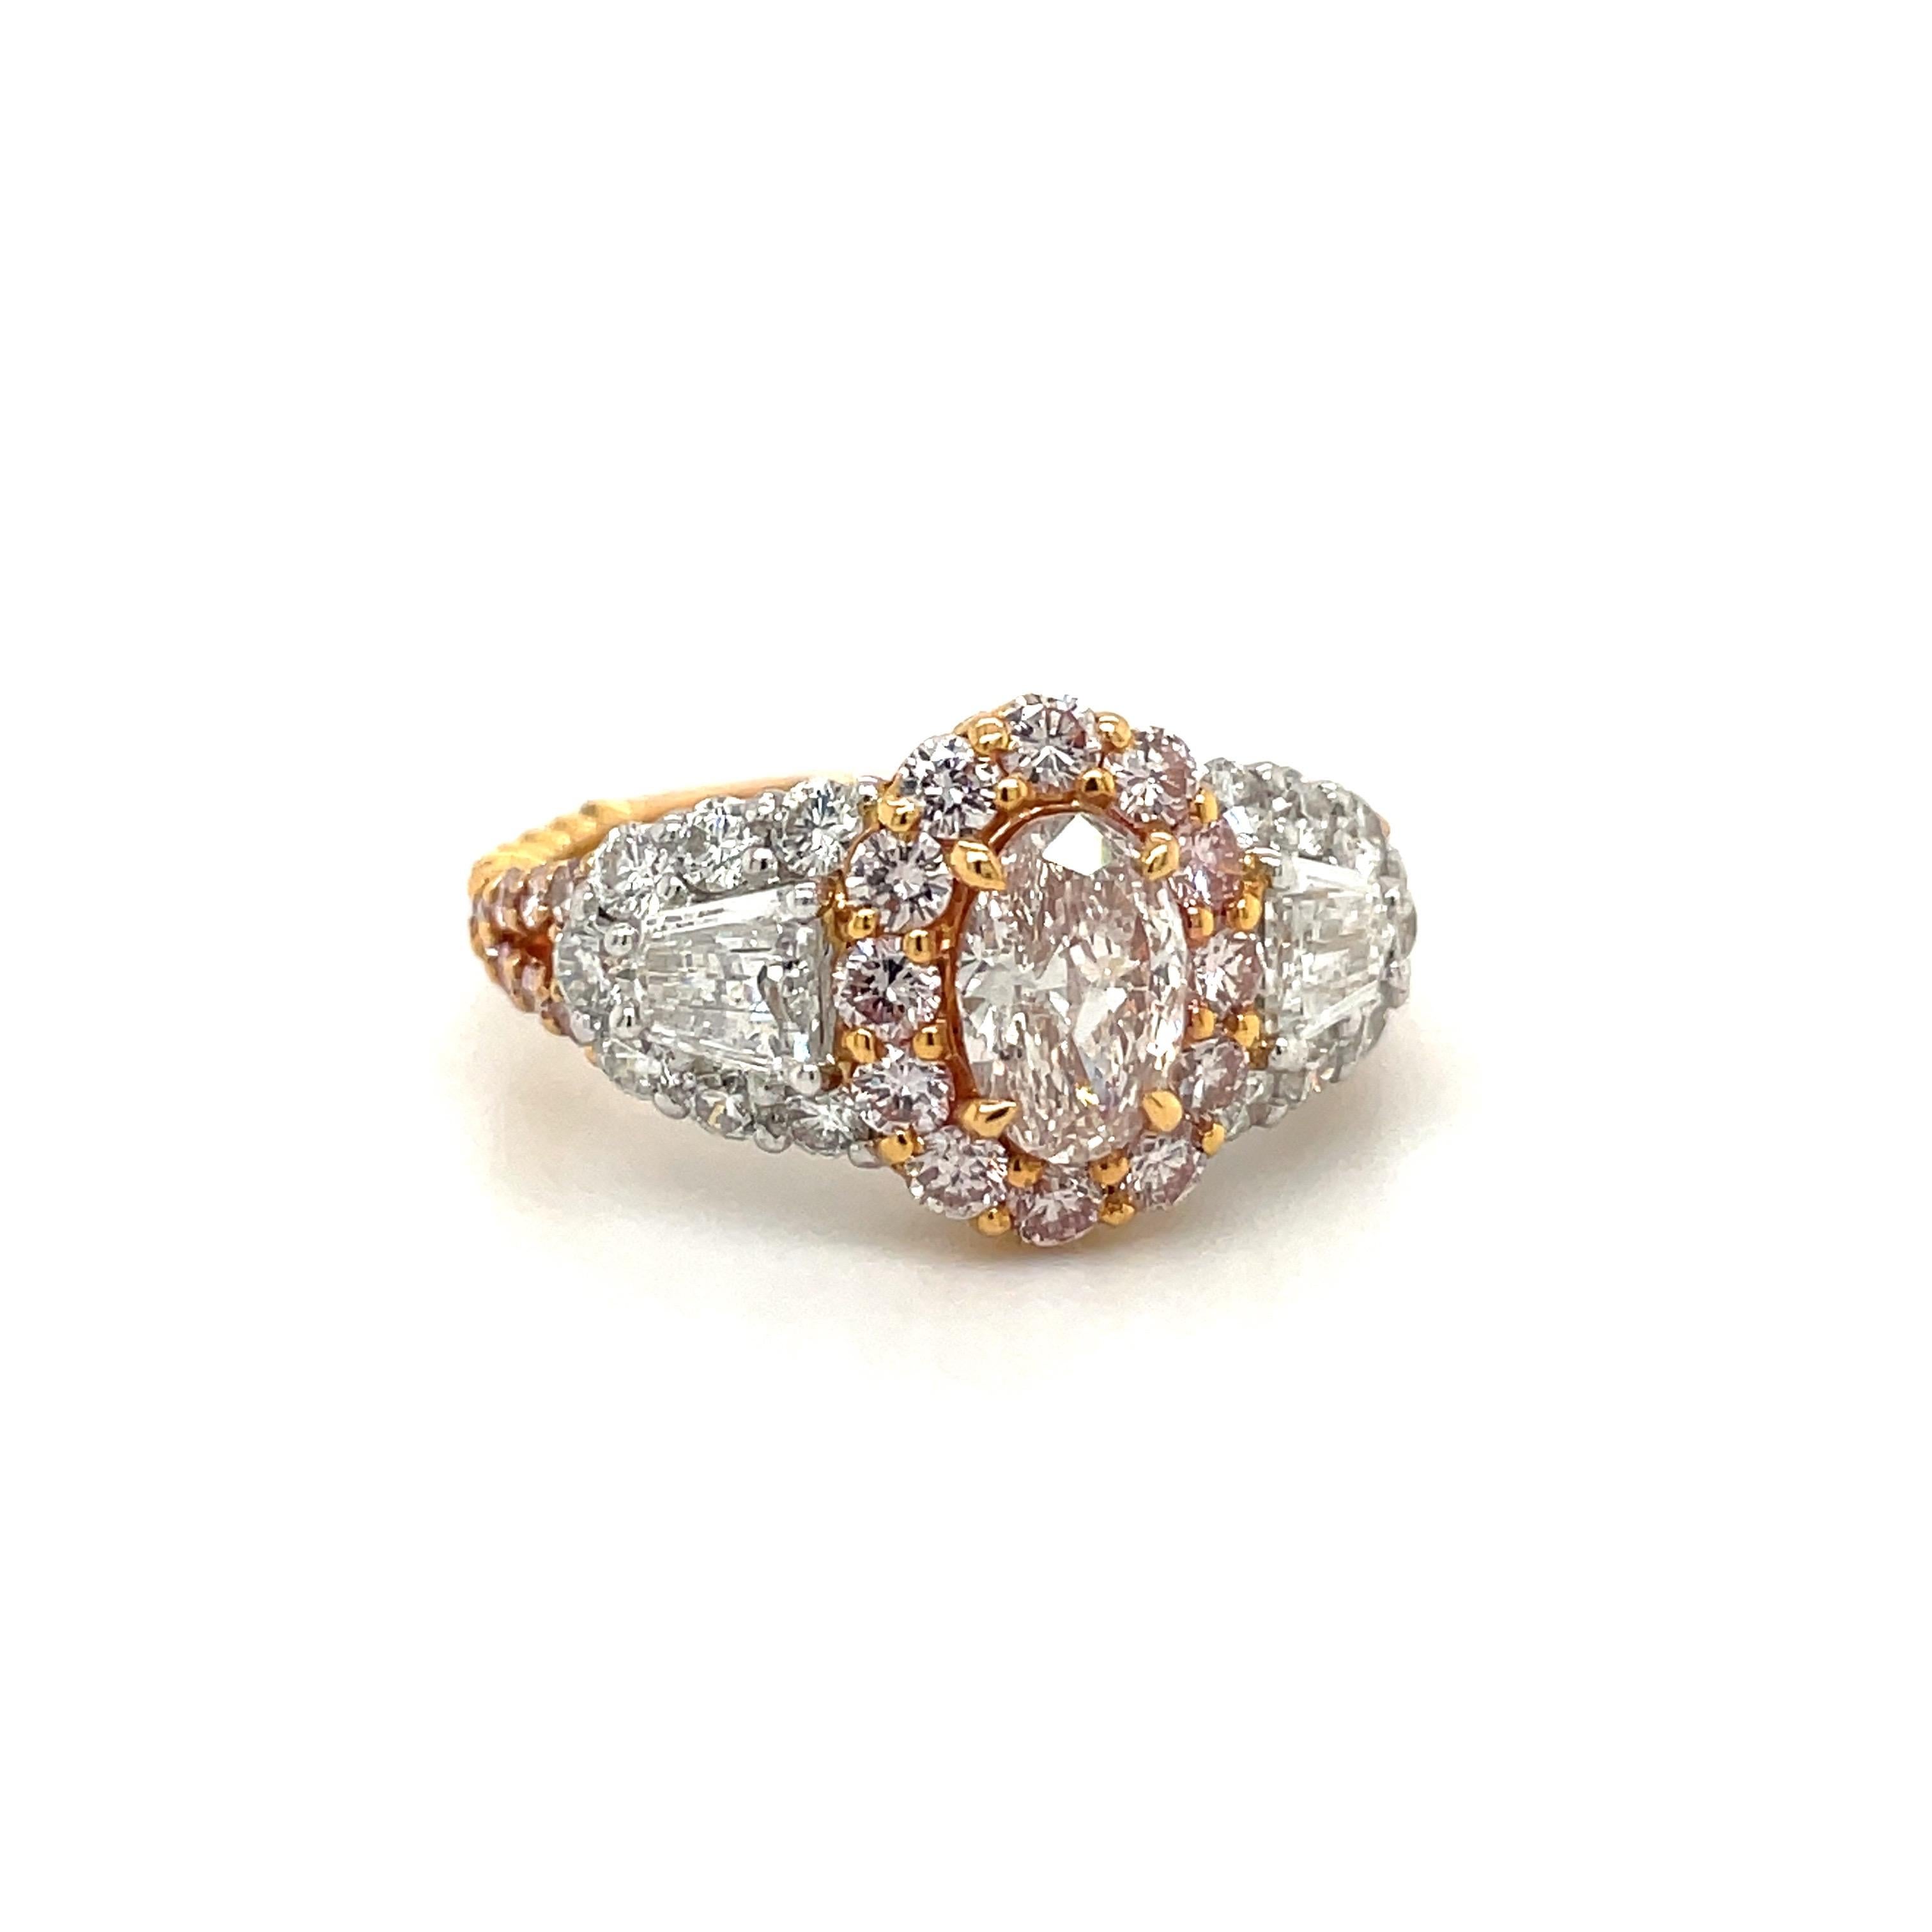 Created by Cellini Jewelers, this stunning oval-cut fancy light brownish pink is set in a truly unique 18-karat rose gold and platinum, surrounded by round brilliant pink diamonds and accented with white diamonds.
Center oval- cut pink diamond